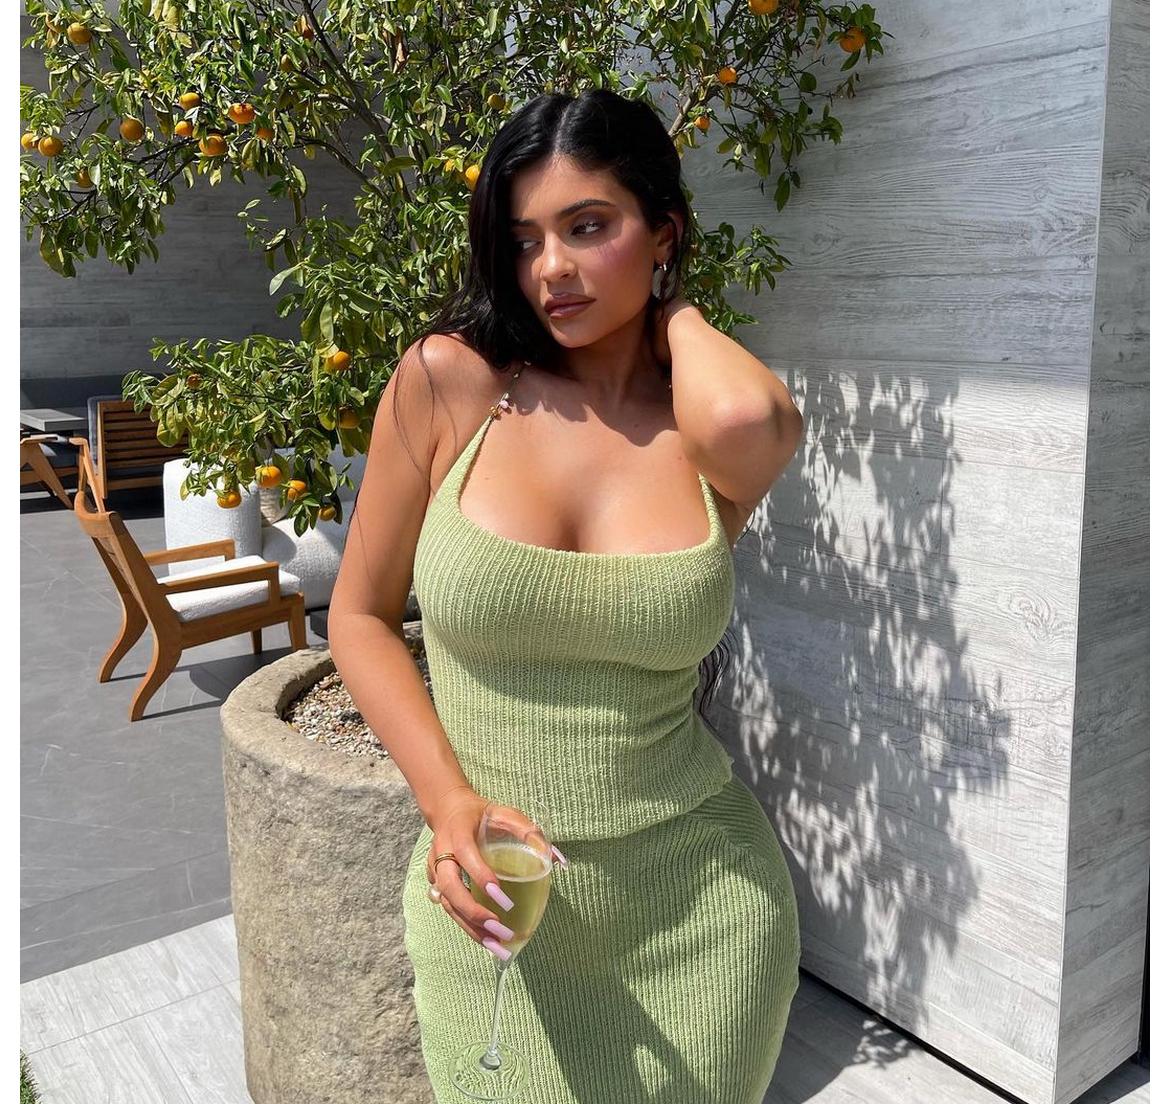 A queen in every right, Kylie Jenner smashes records by becoming the first woman in the world to amass 300 million Instagram followers - Luxurylaunches